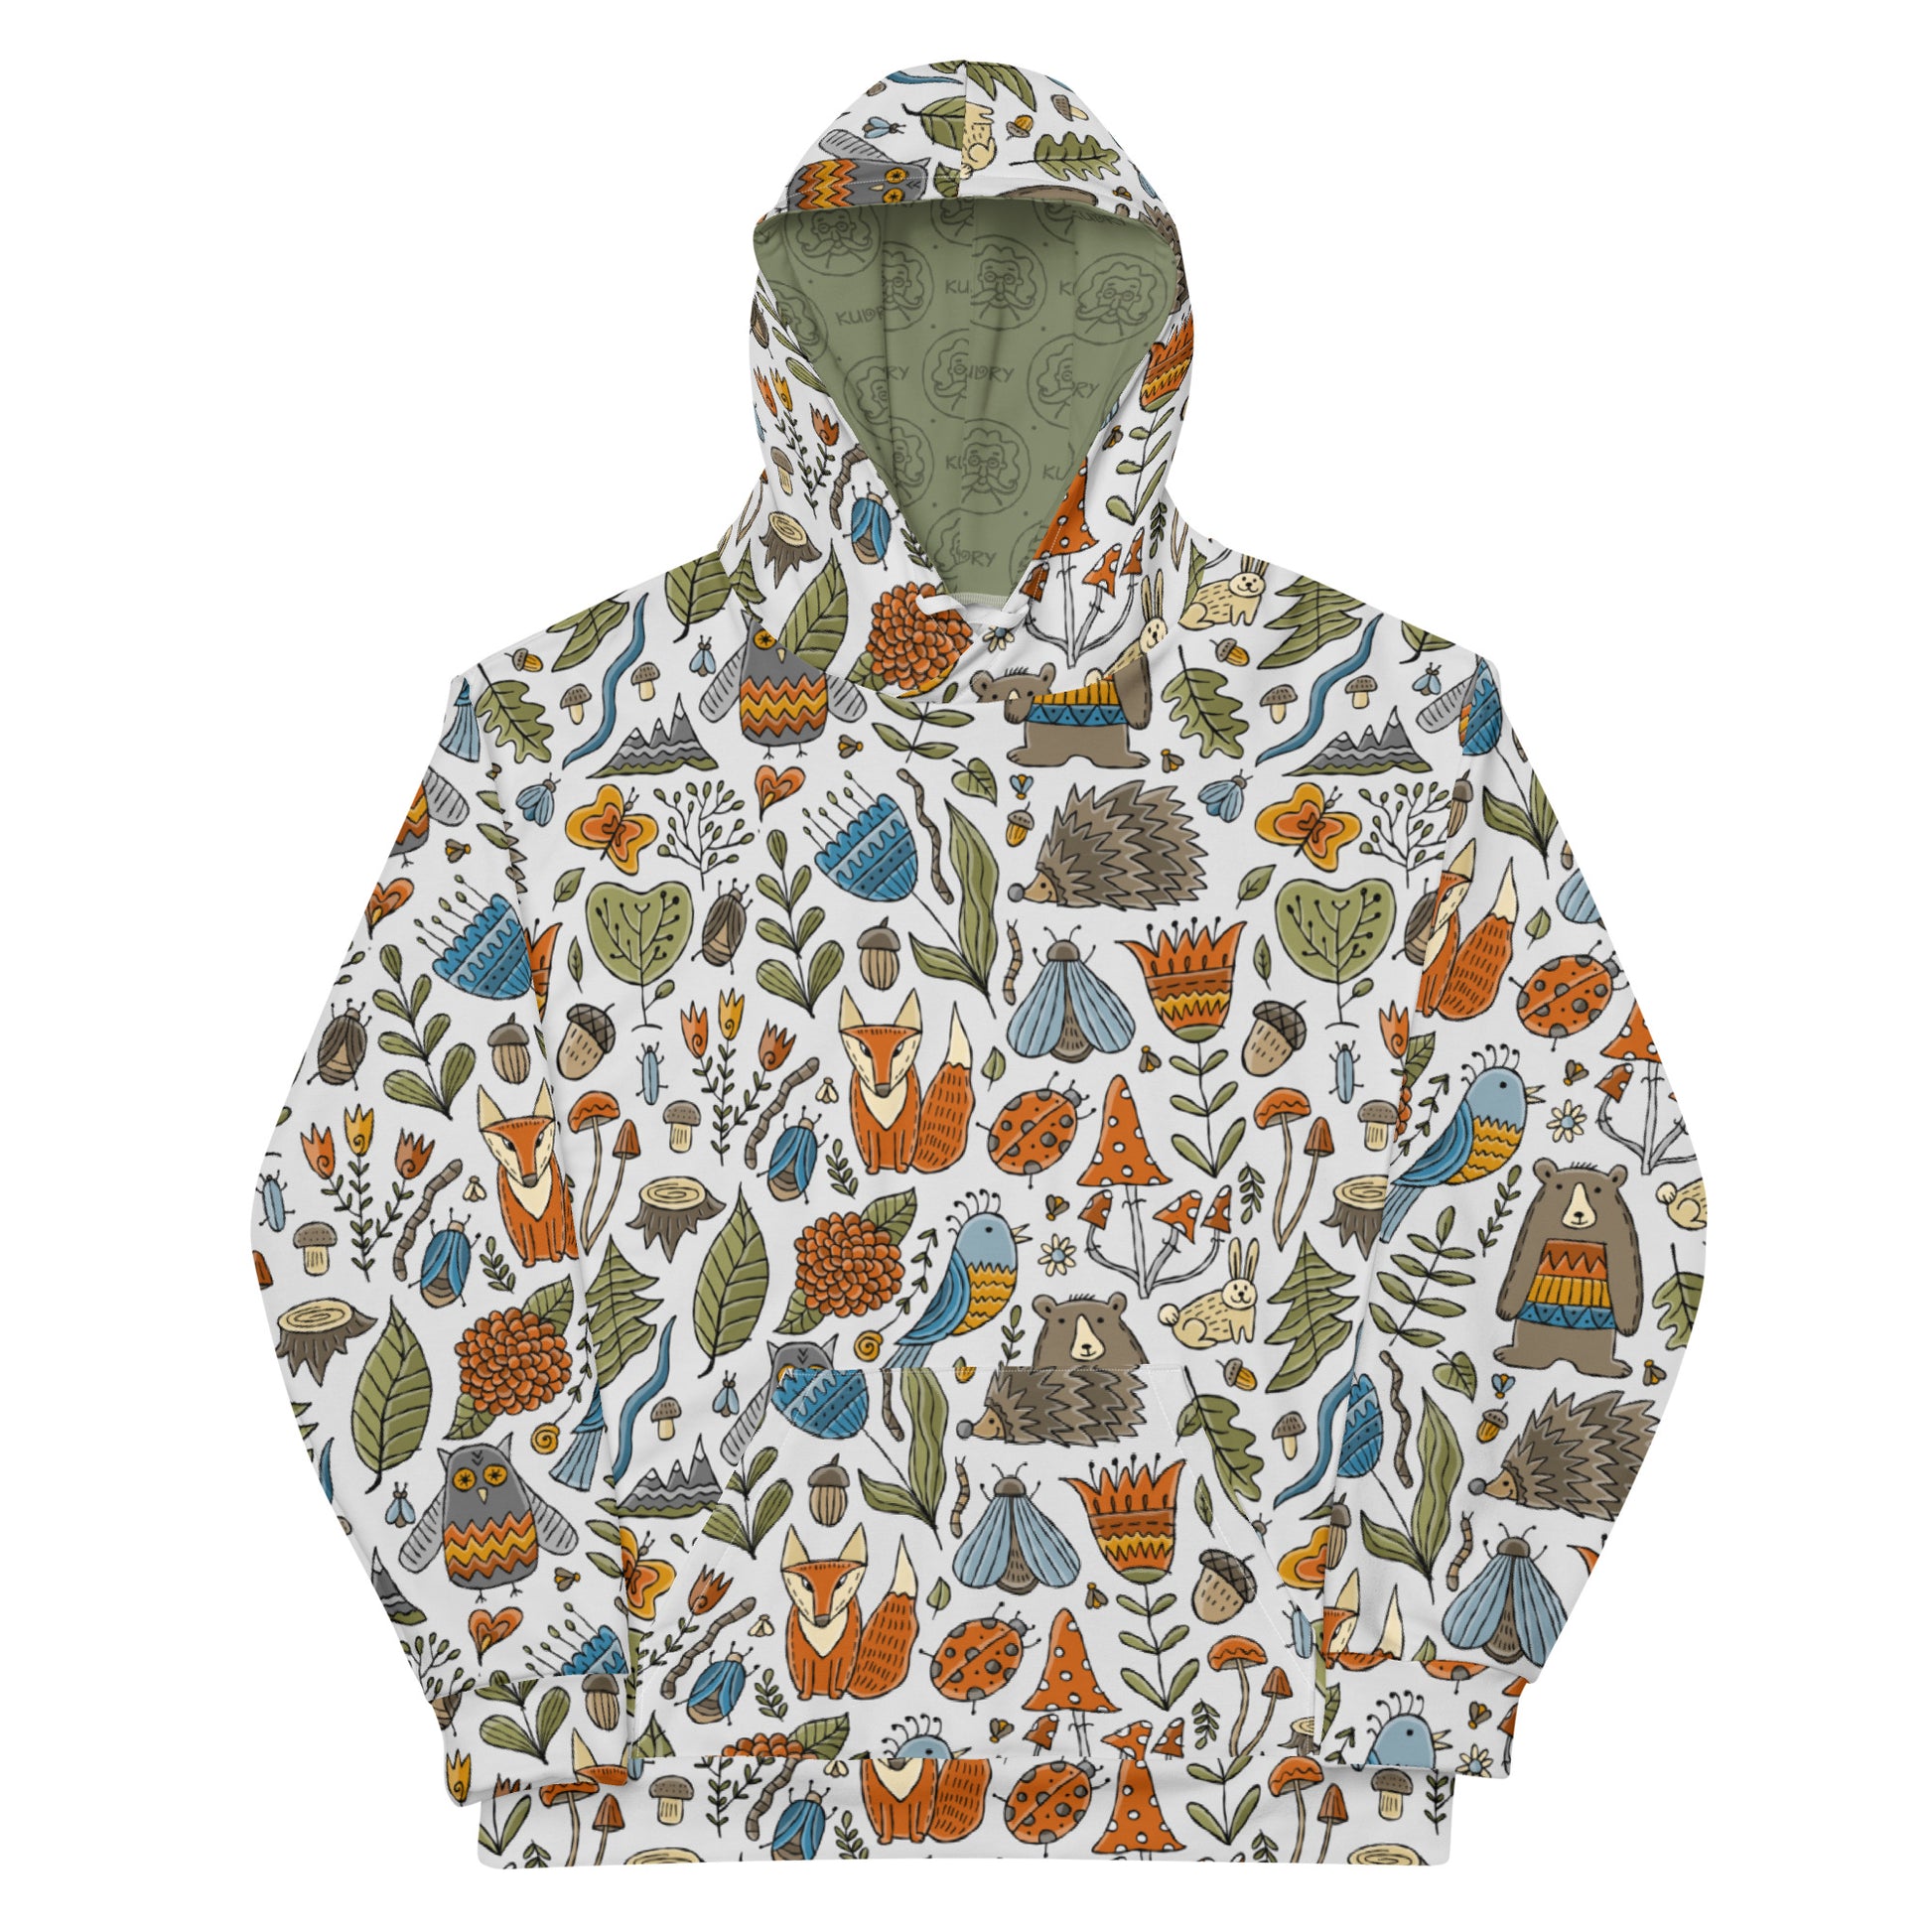 Artistic Designer Hoodie light gray background all over full print vintage style with magic world illustration of forest  - animals and birds flowers and nature bear fox owls butterflies hedgehog insects mashrooms and trees. Festival comfortable stylish wear trendy fashionable rare beautiful unique. Kudry